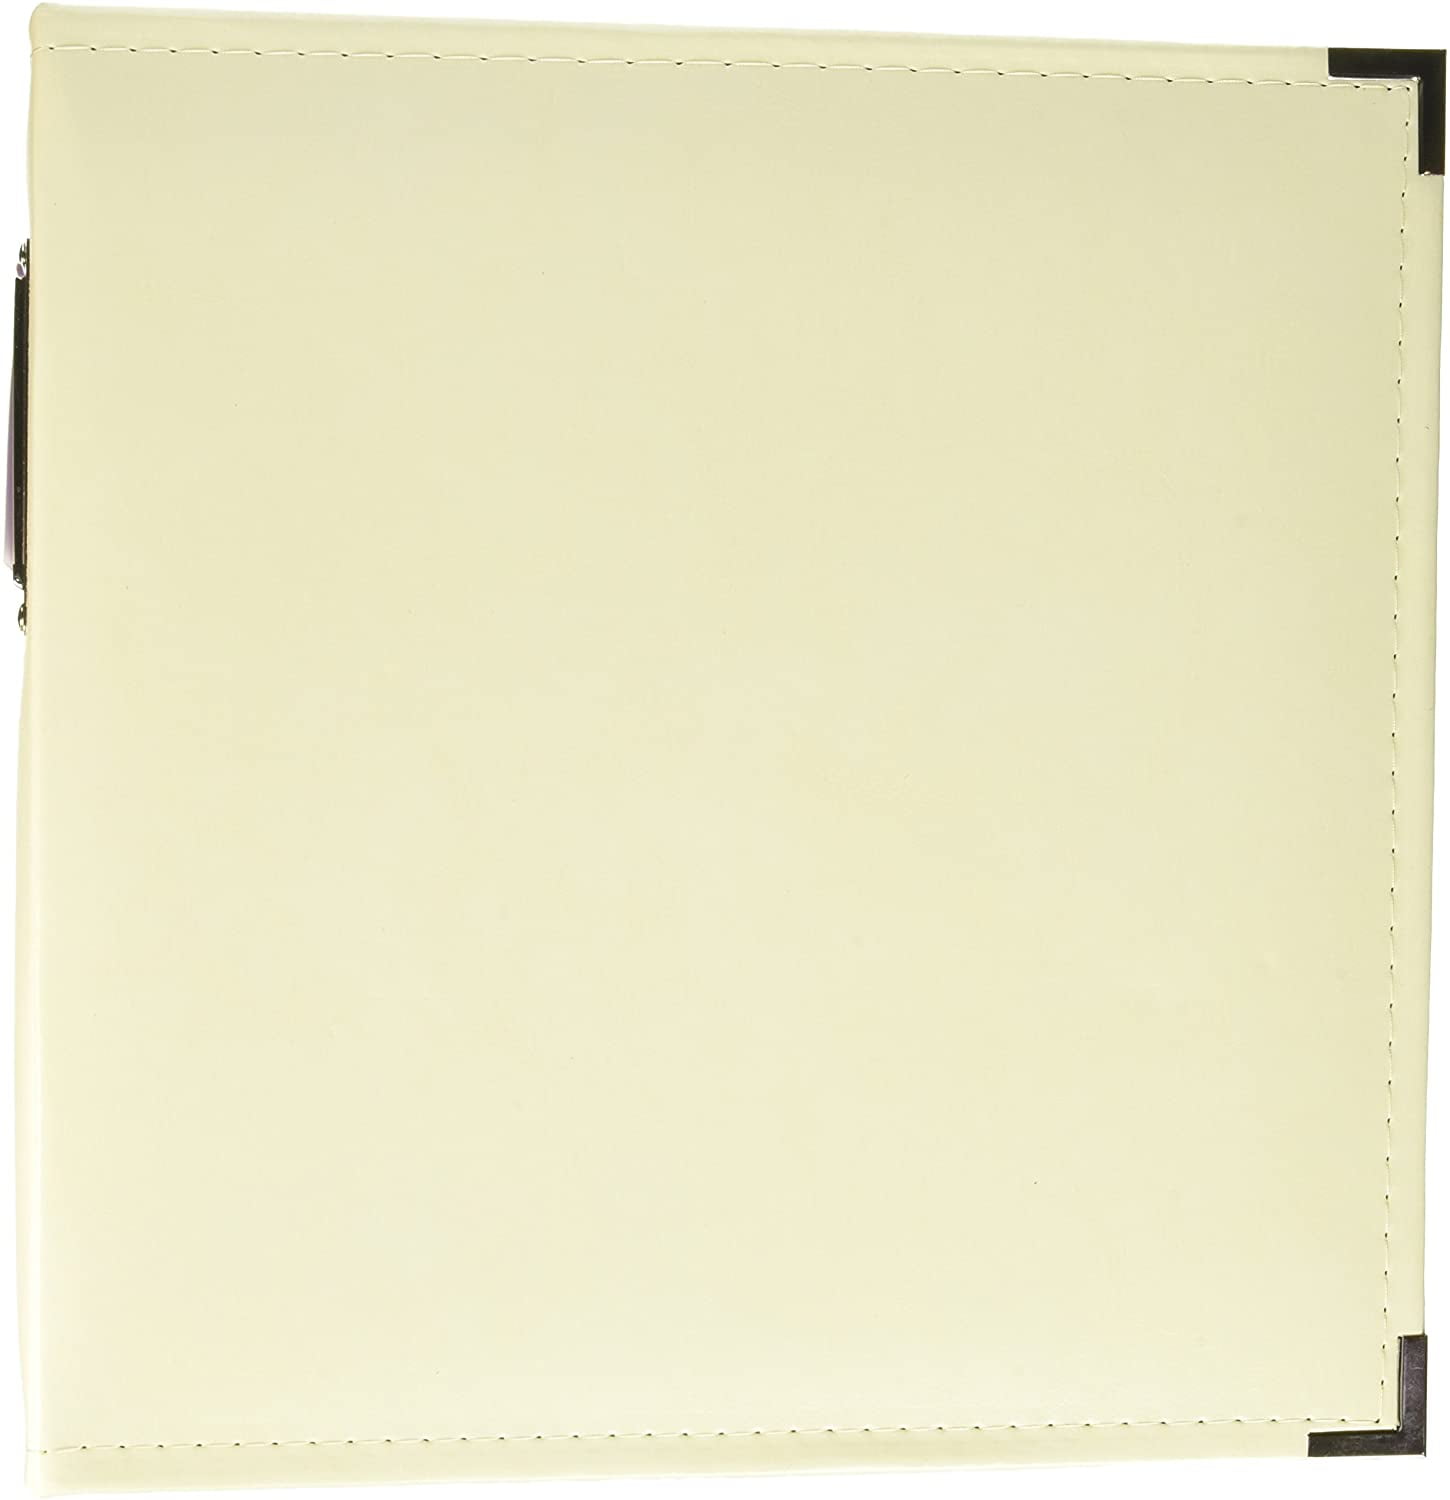 We R Memory Keepers 8-1/2-Inch by 11-Inch Faux Leather 3-Ring Binder Vanilla